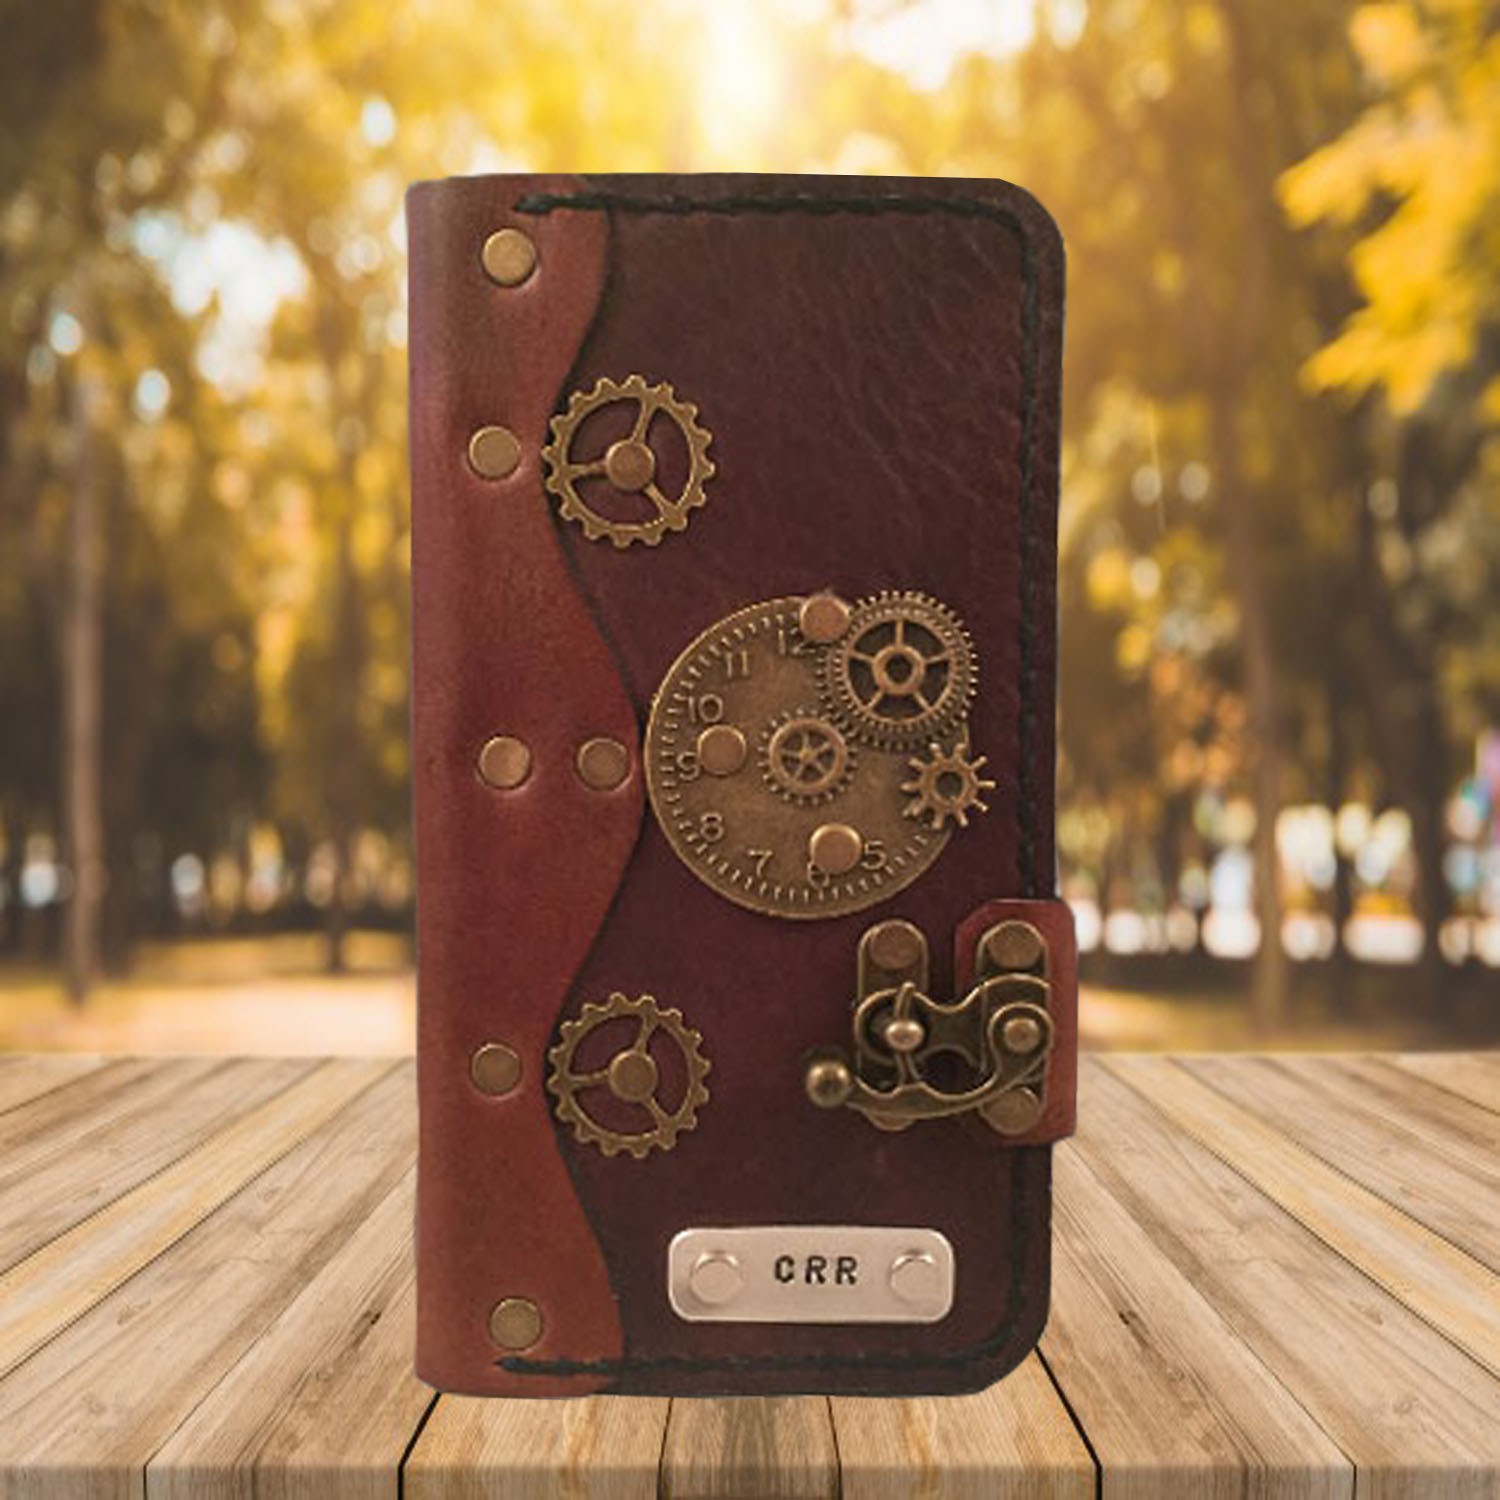 Steampunk Skull Envelope Phone Wallet PU Leather Handmade Case For Apple iPhone SE2 6 6s 7 8 Plus X XR XS Max iPhone 11 12 Mini Pro Max